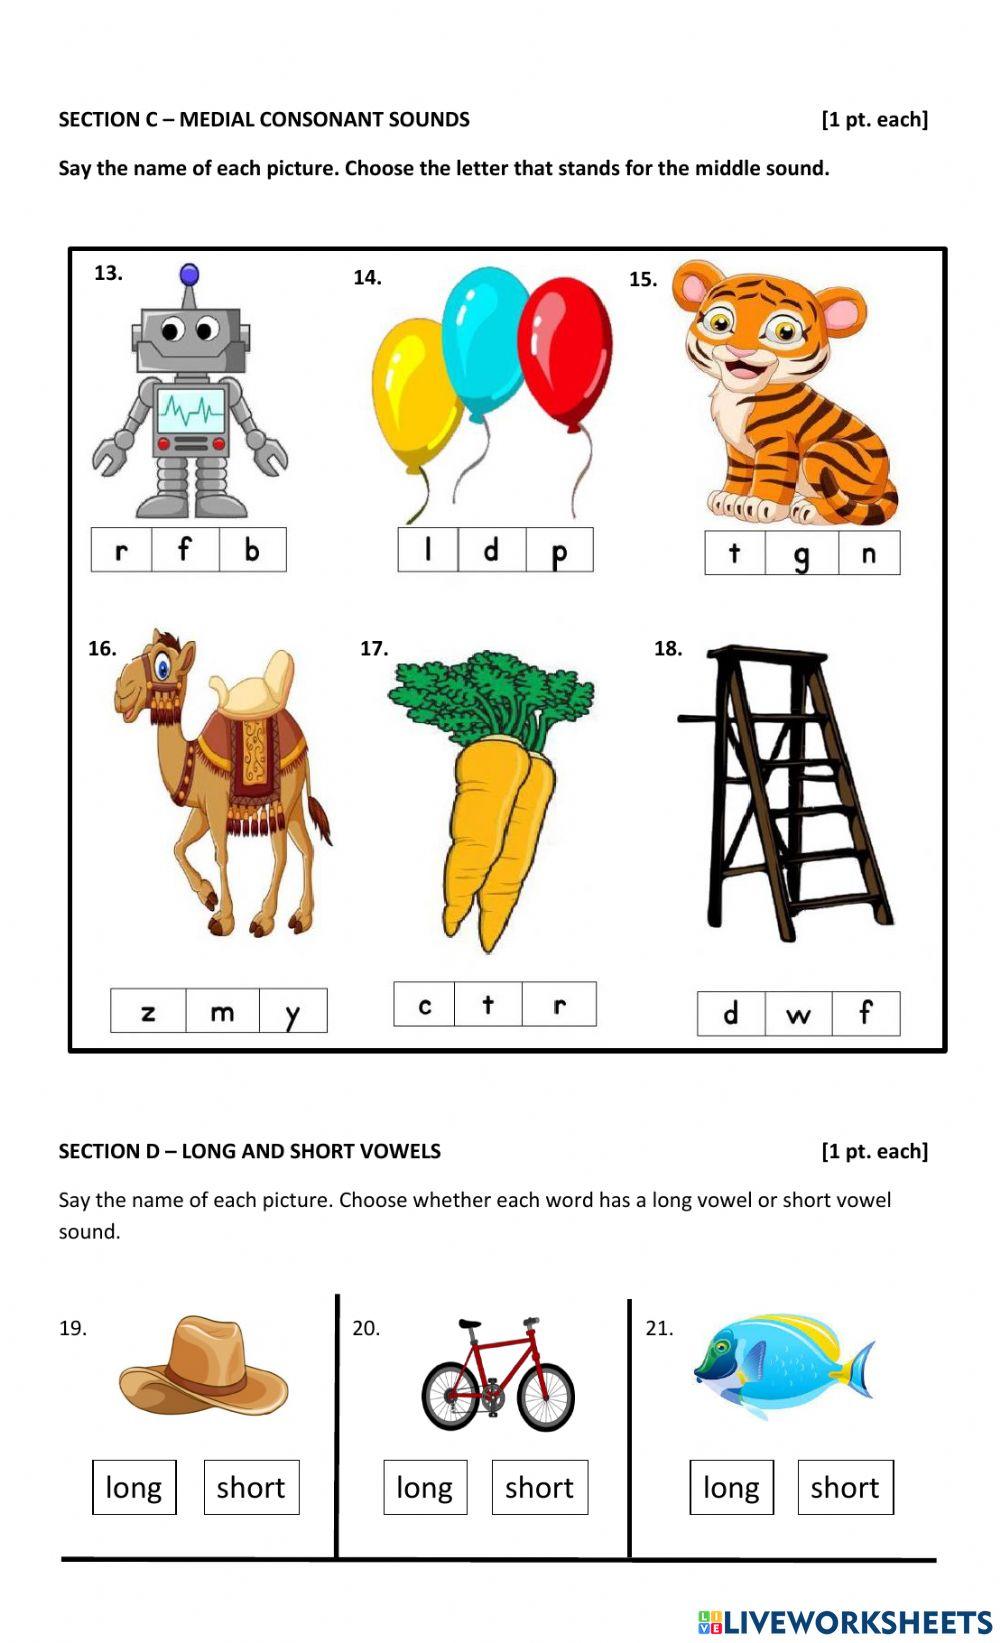 Phonics End of Month Quiz